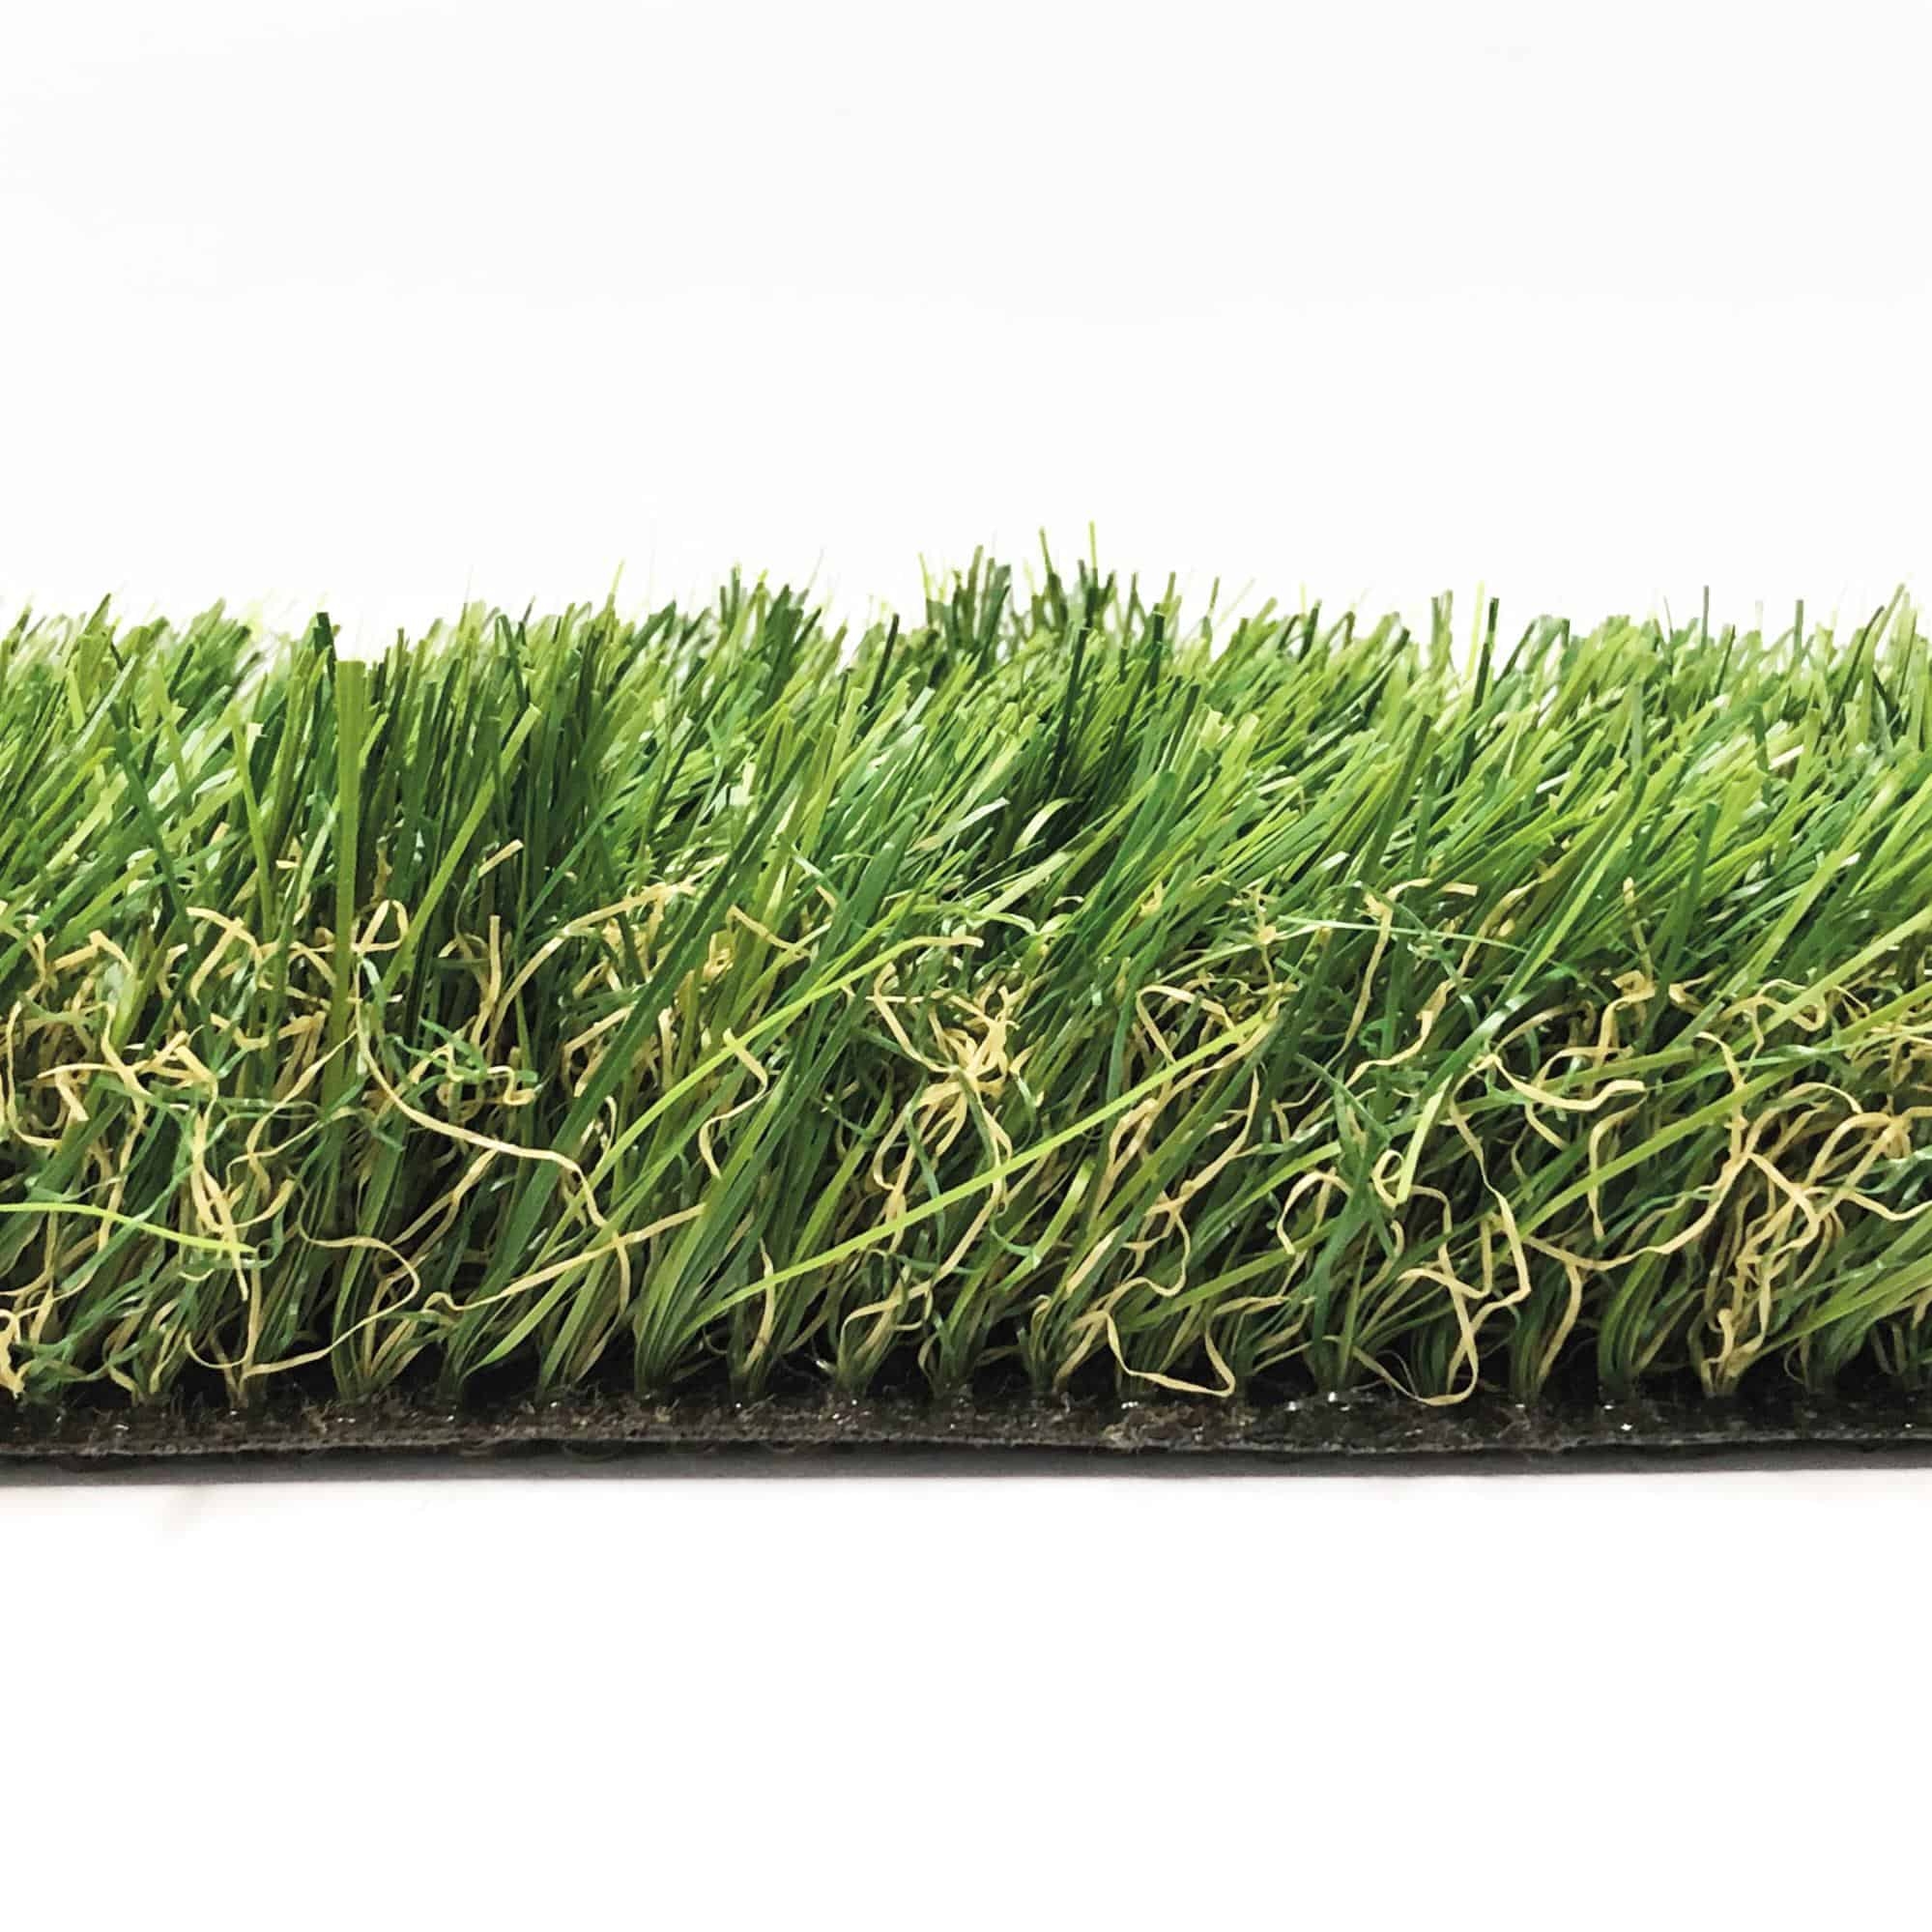 CORE Lawn Natural Artificial Grass 4m Wide Roll 22 m (Full Roll)